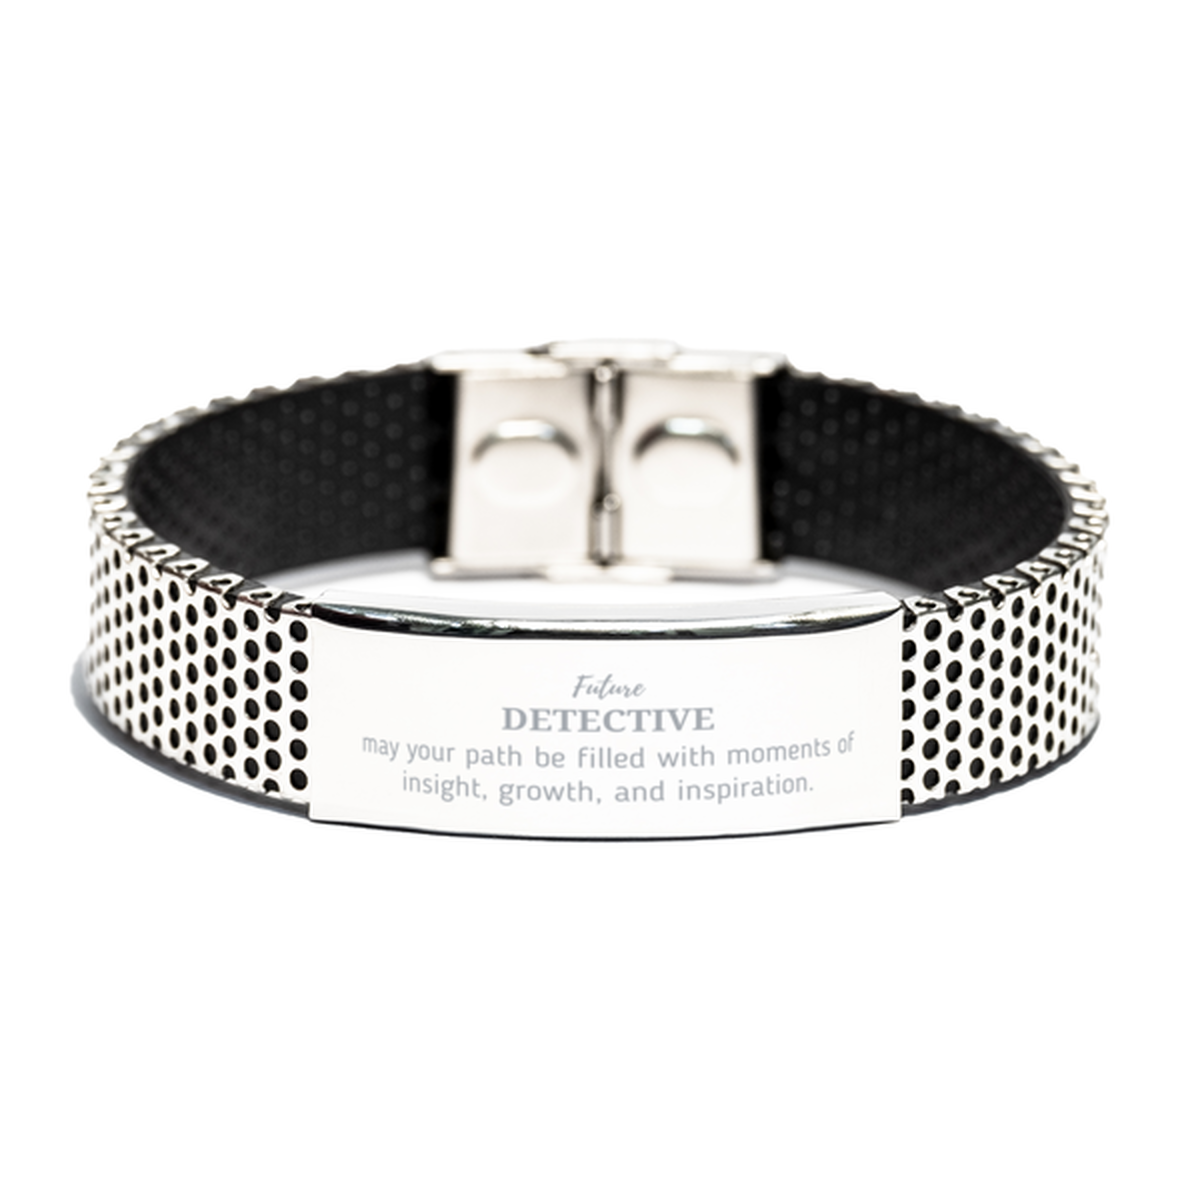 Future Detective Gifts, May your path be filled with moments of insight, Graduation Gifts for New Detective, Christmas Unique Stainless Steel Bracelet For Men, Women, Friends